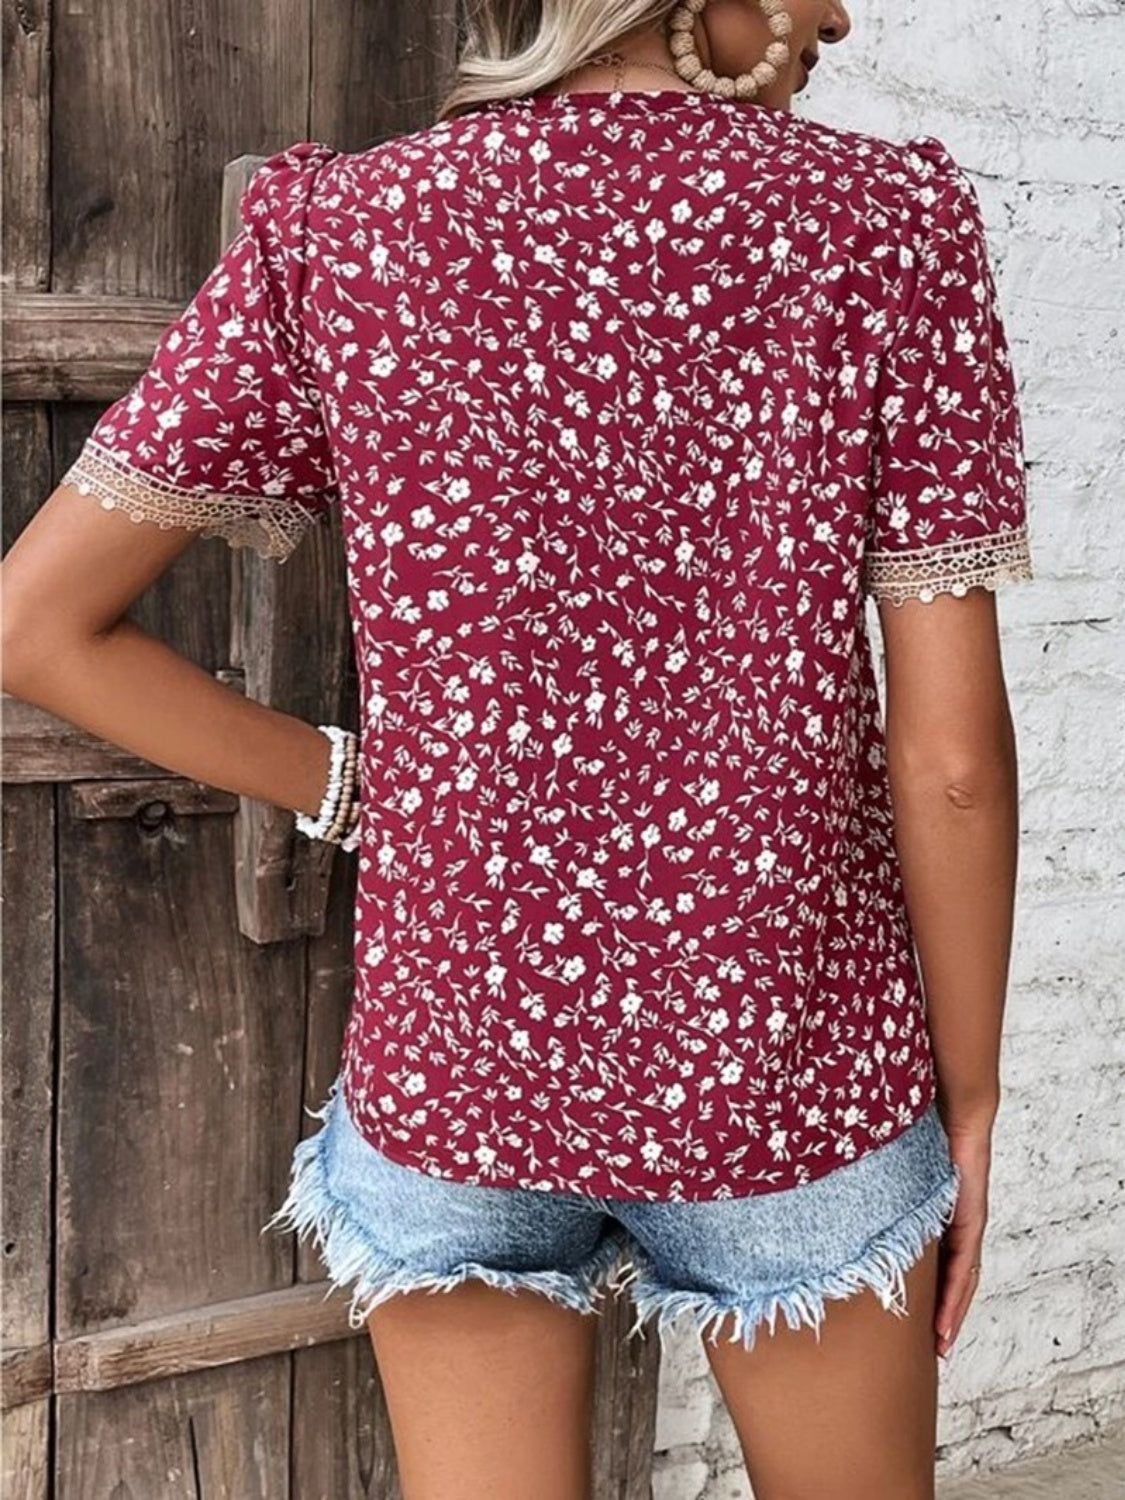 6 The Classy Floral V-Neck Shirt (S - 3X)